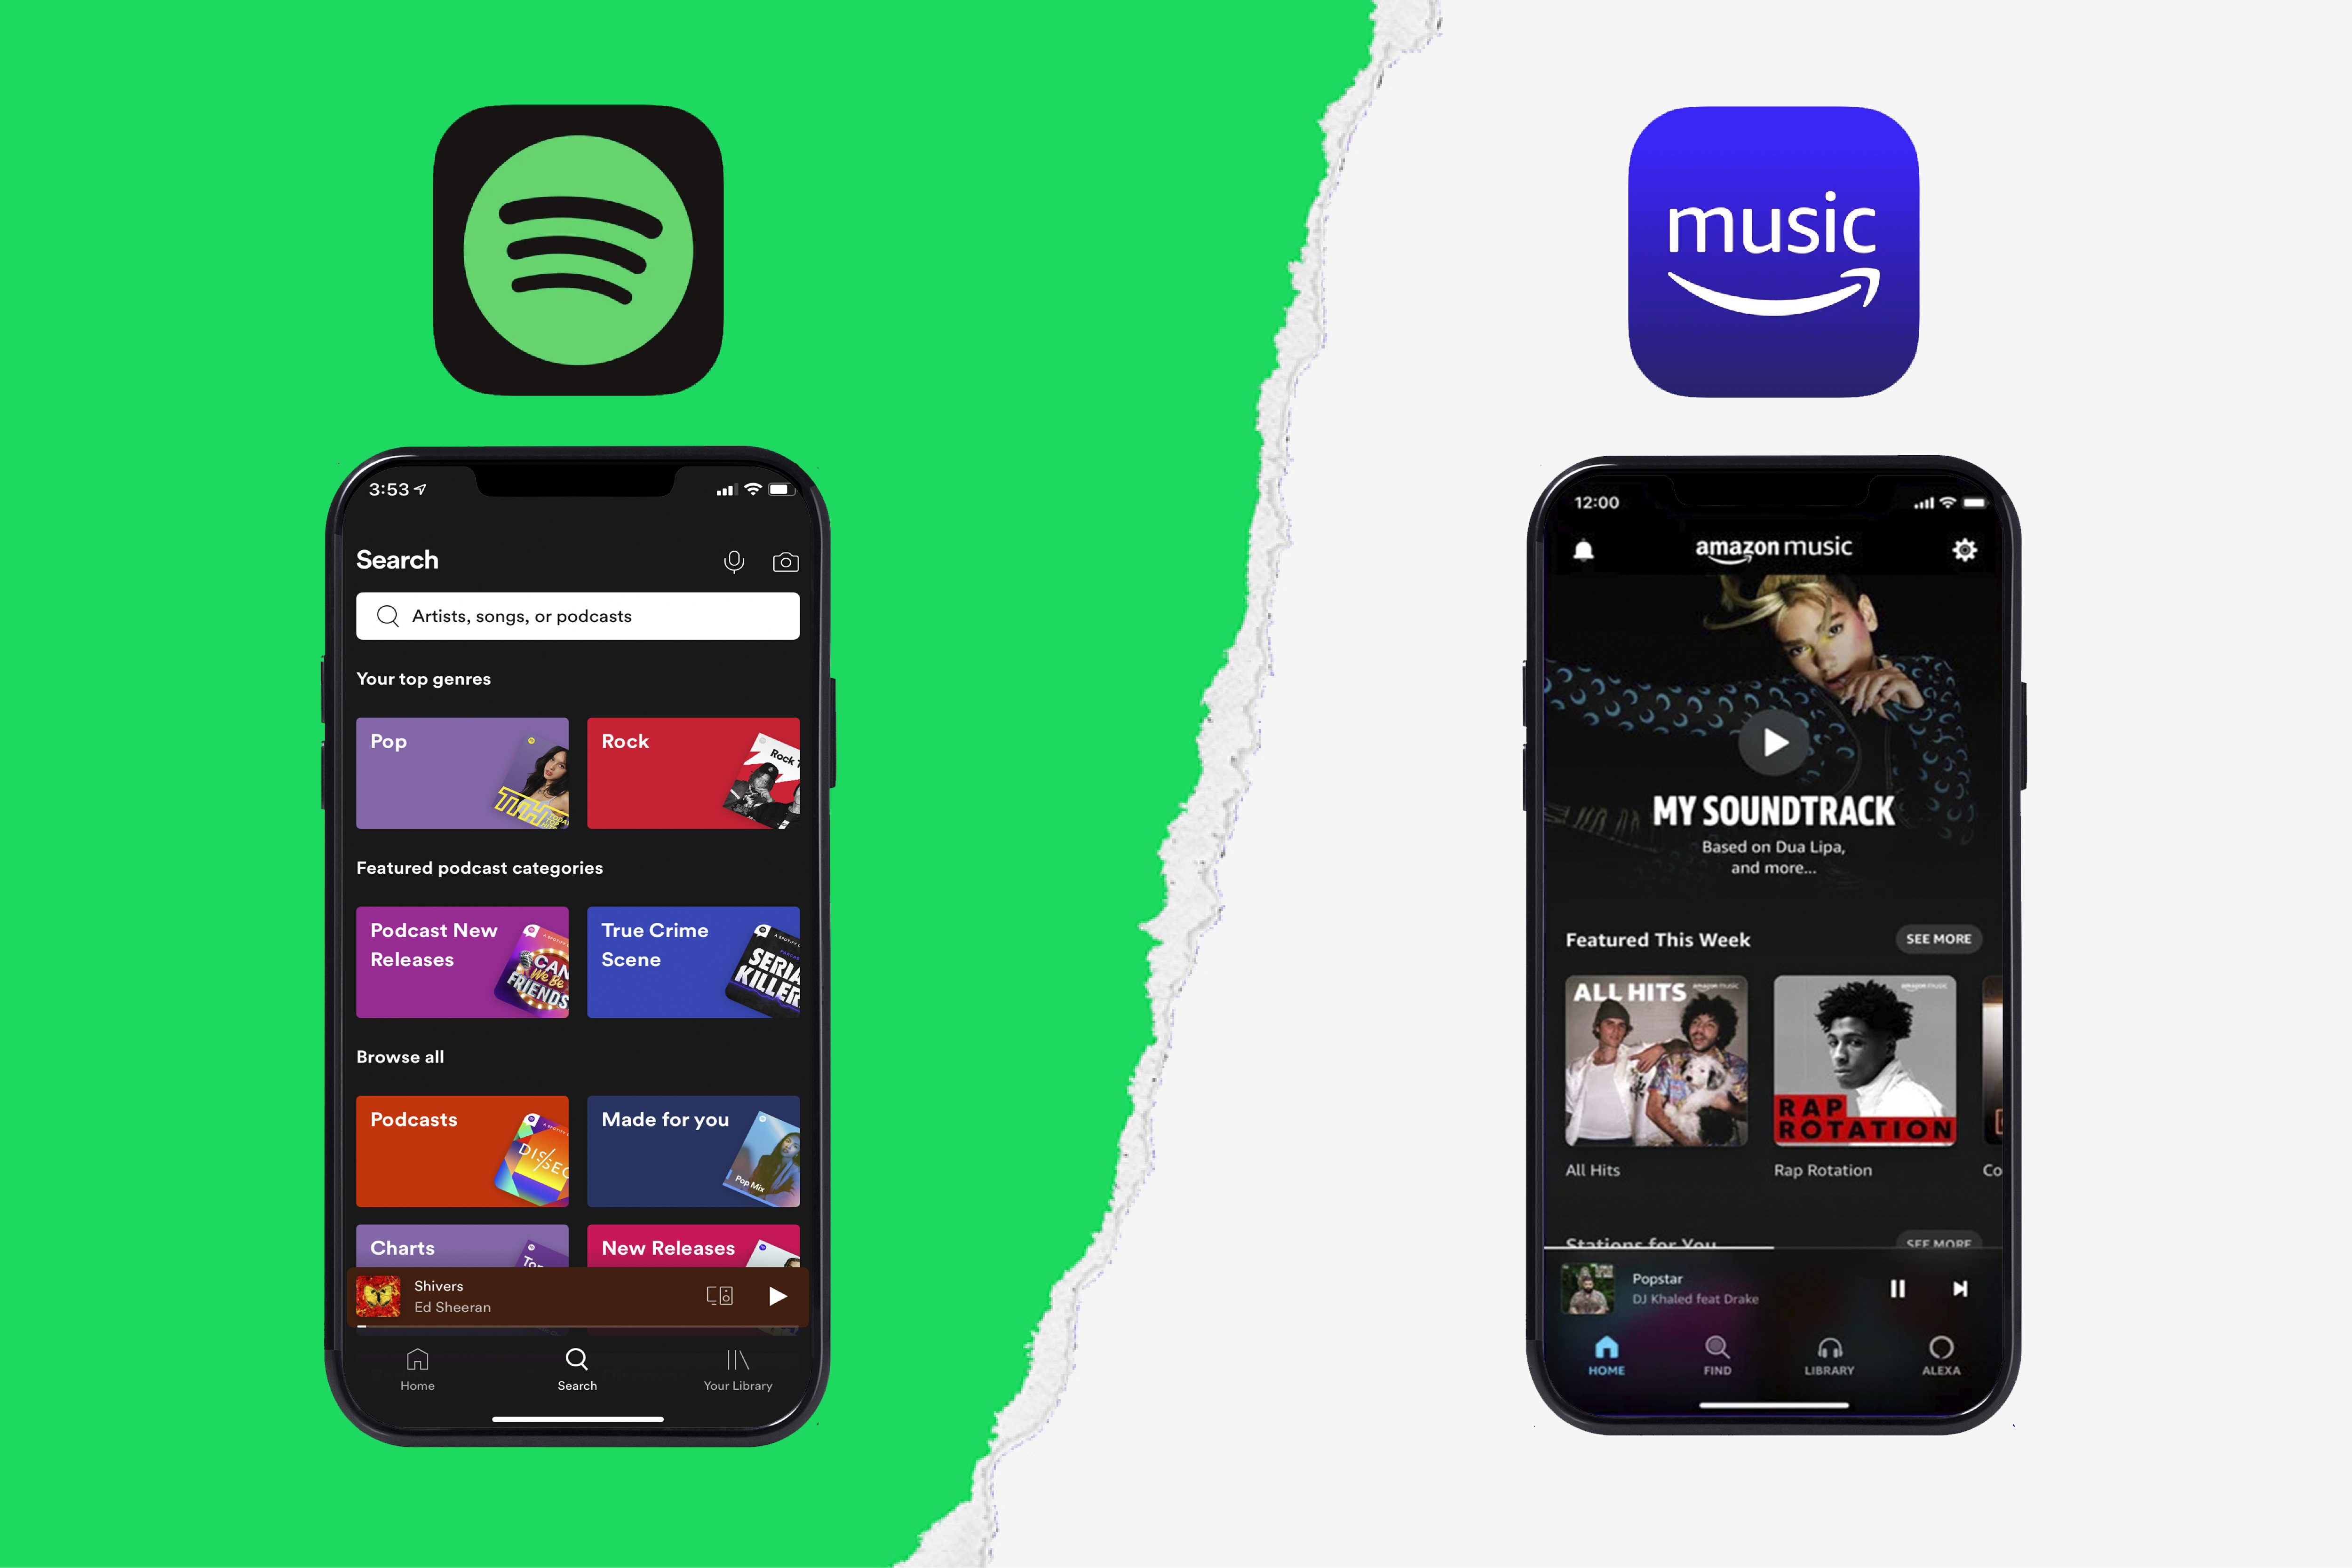 Music vs. Spotify: Which Streaming Service Is Better?